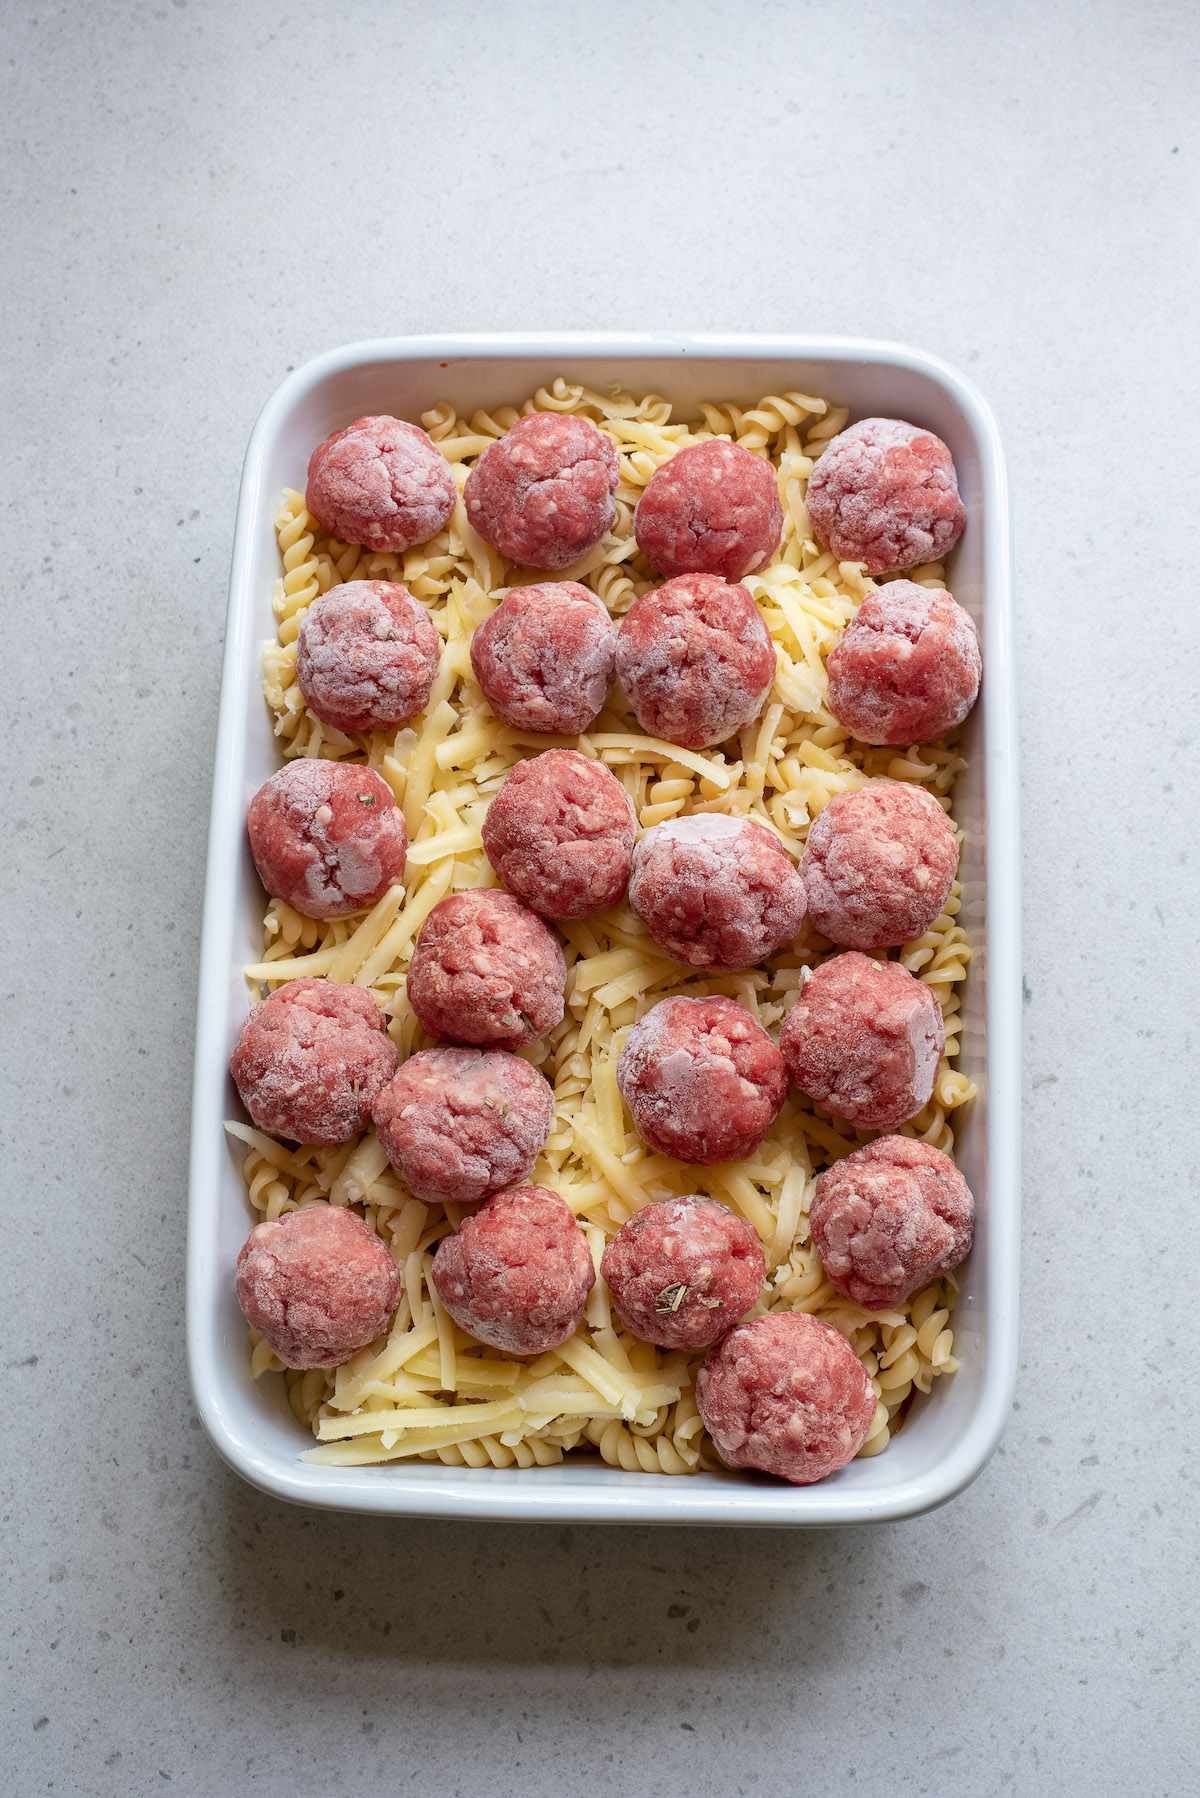 the uncooked casserole with the frozen meatballs added